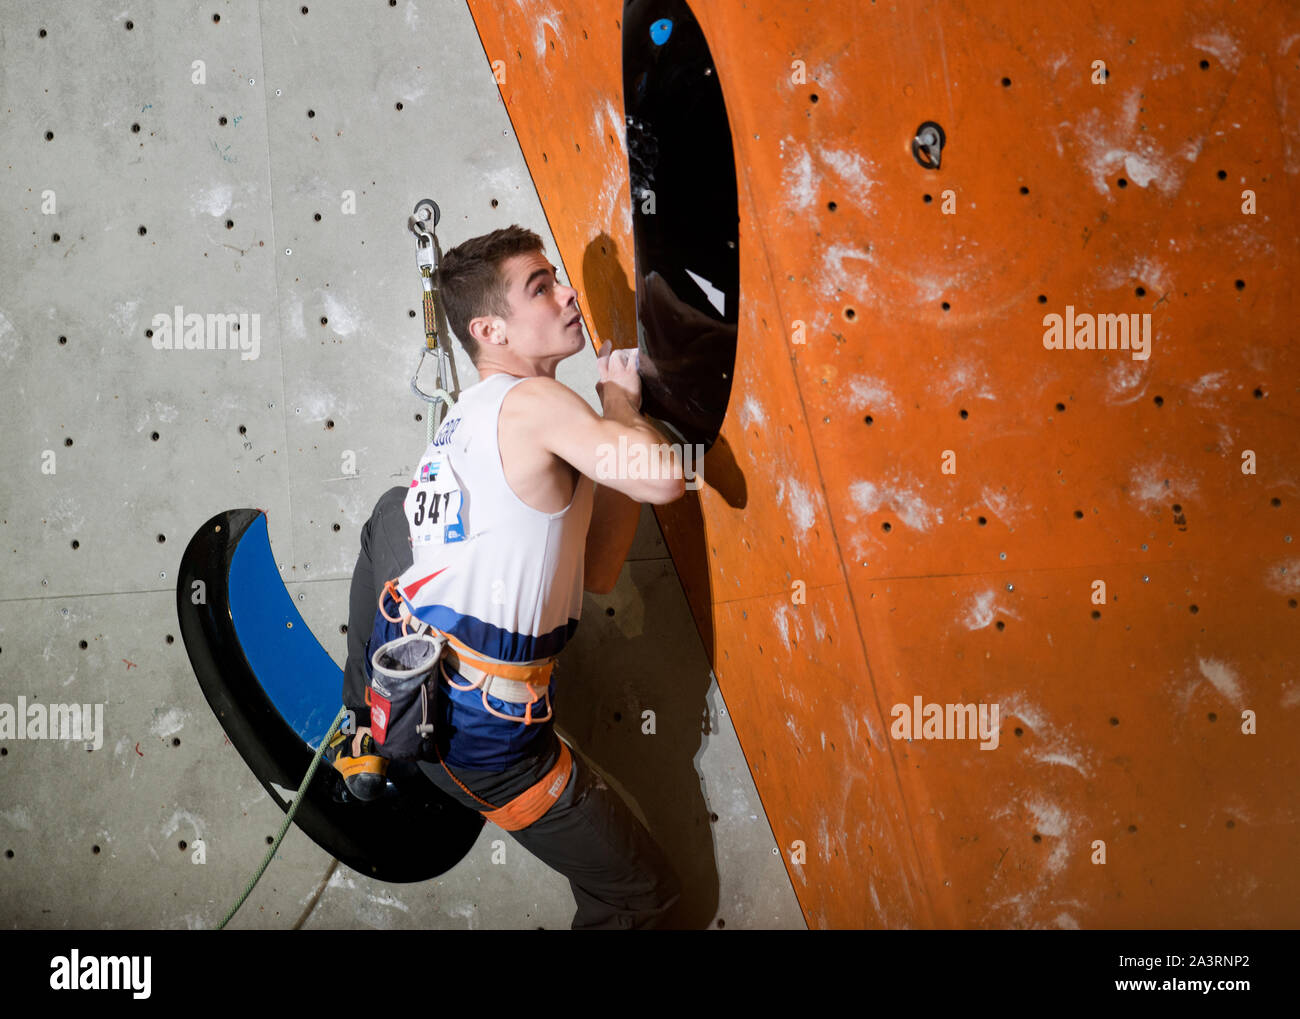 James Pope of Great Britain competes in the Lead climbing Mens Final on at the IFSC Climbing World Championships at the Edinburgh International Climbi Stock Photo